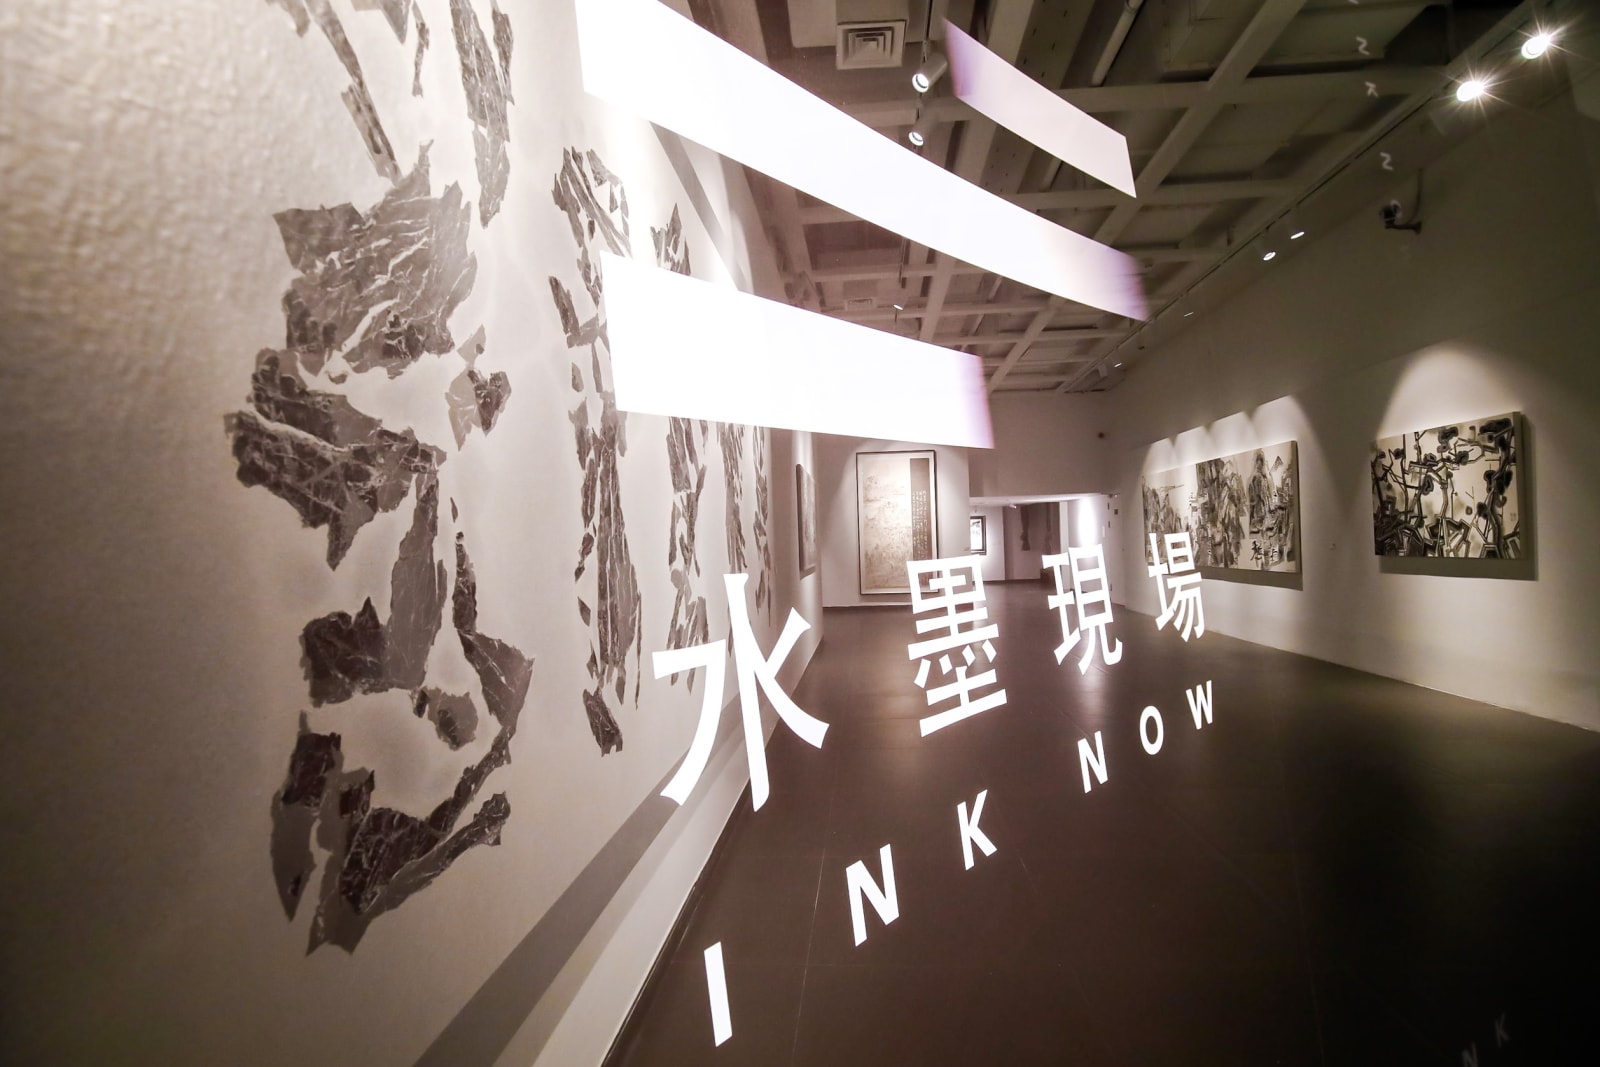 INK NOW Shanghai: Inquiry on Water